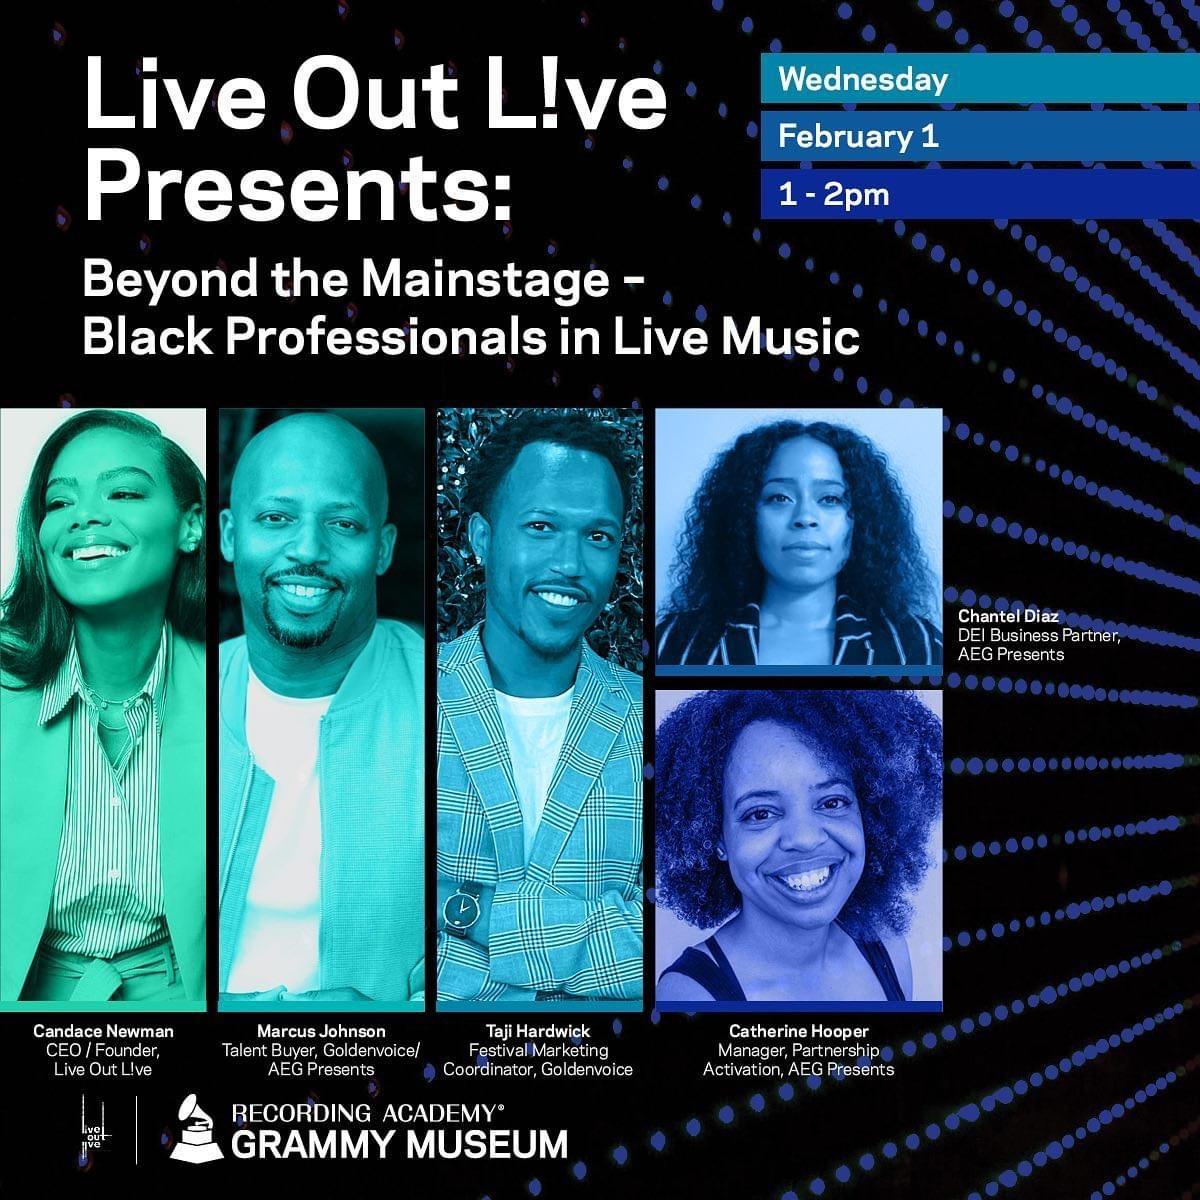 Flyer for The GRAMMY Museum’s LIVE OUT L!VE’s panel.